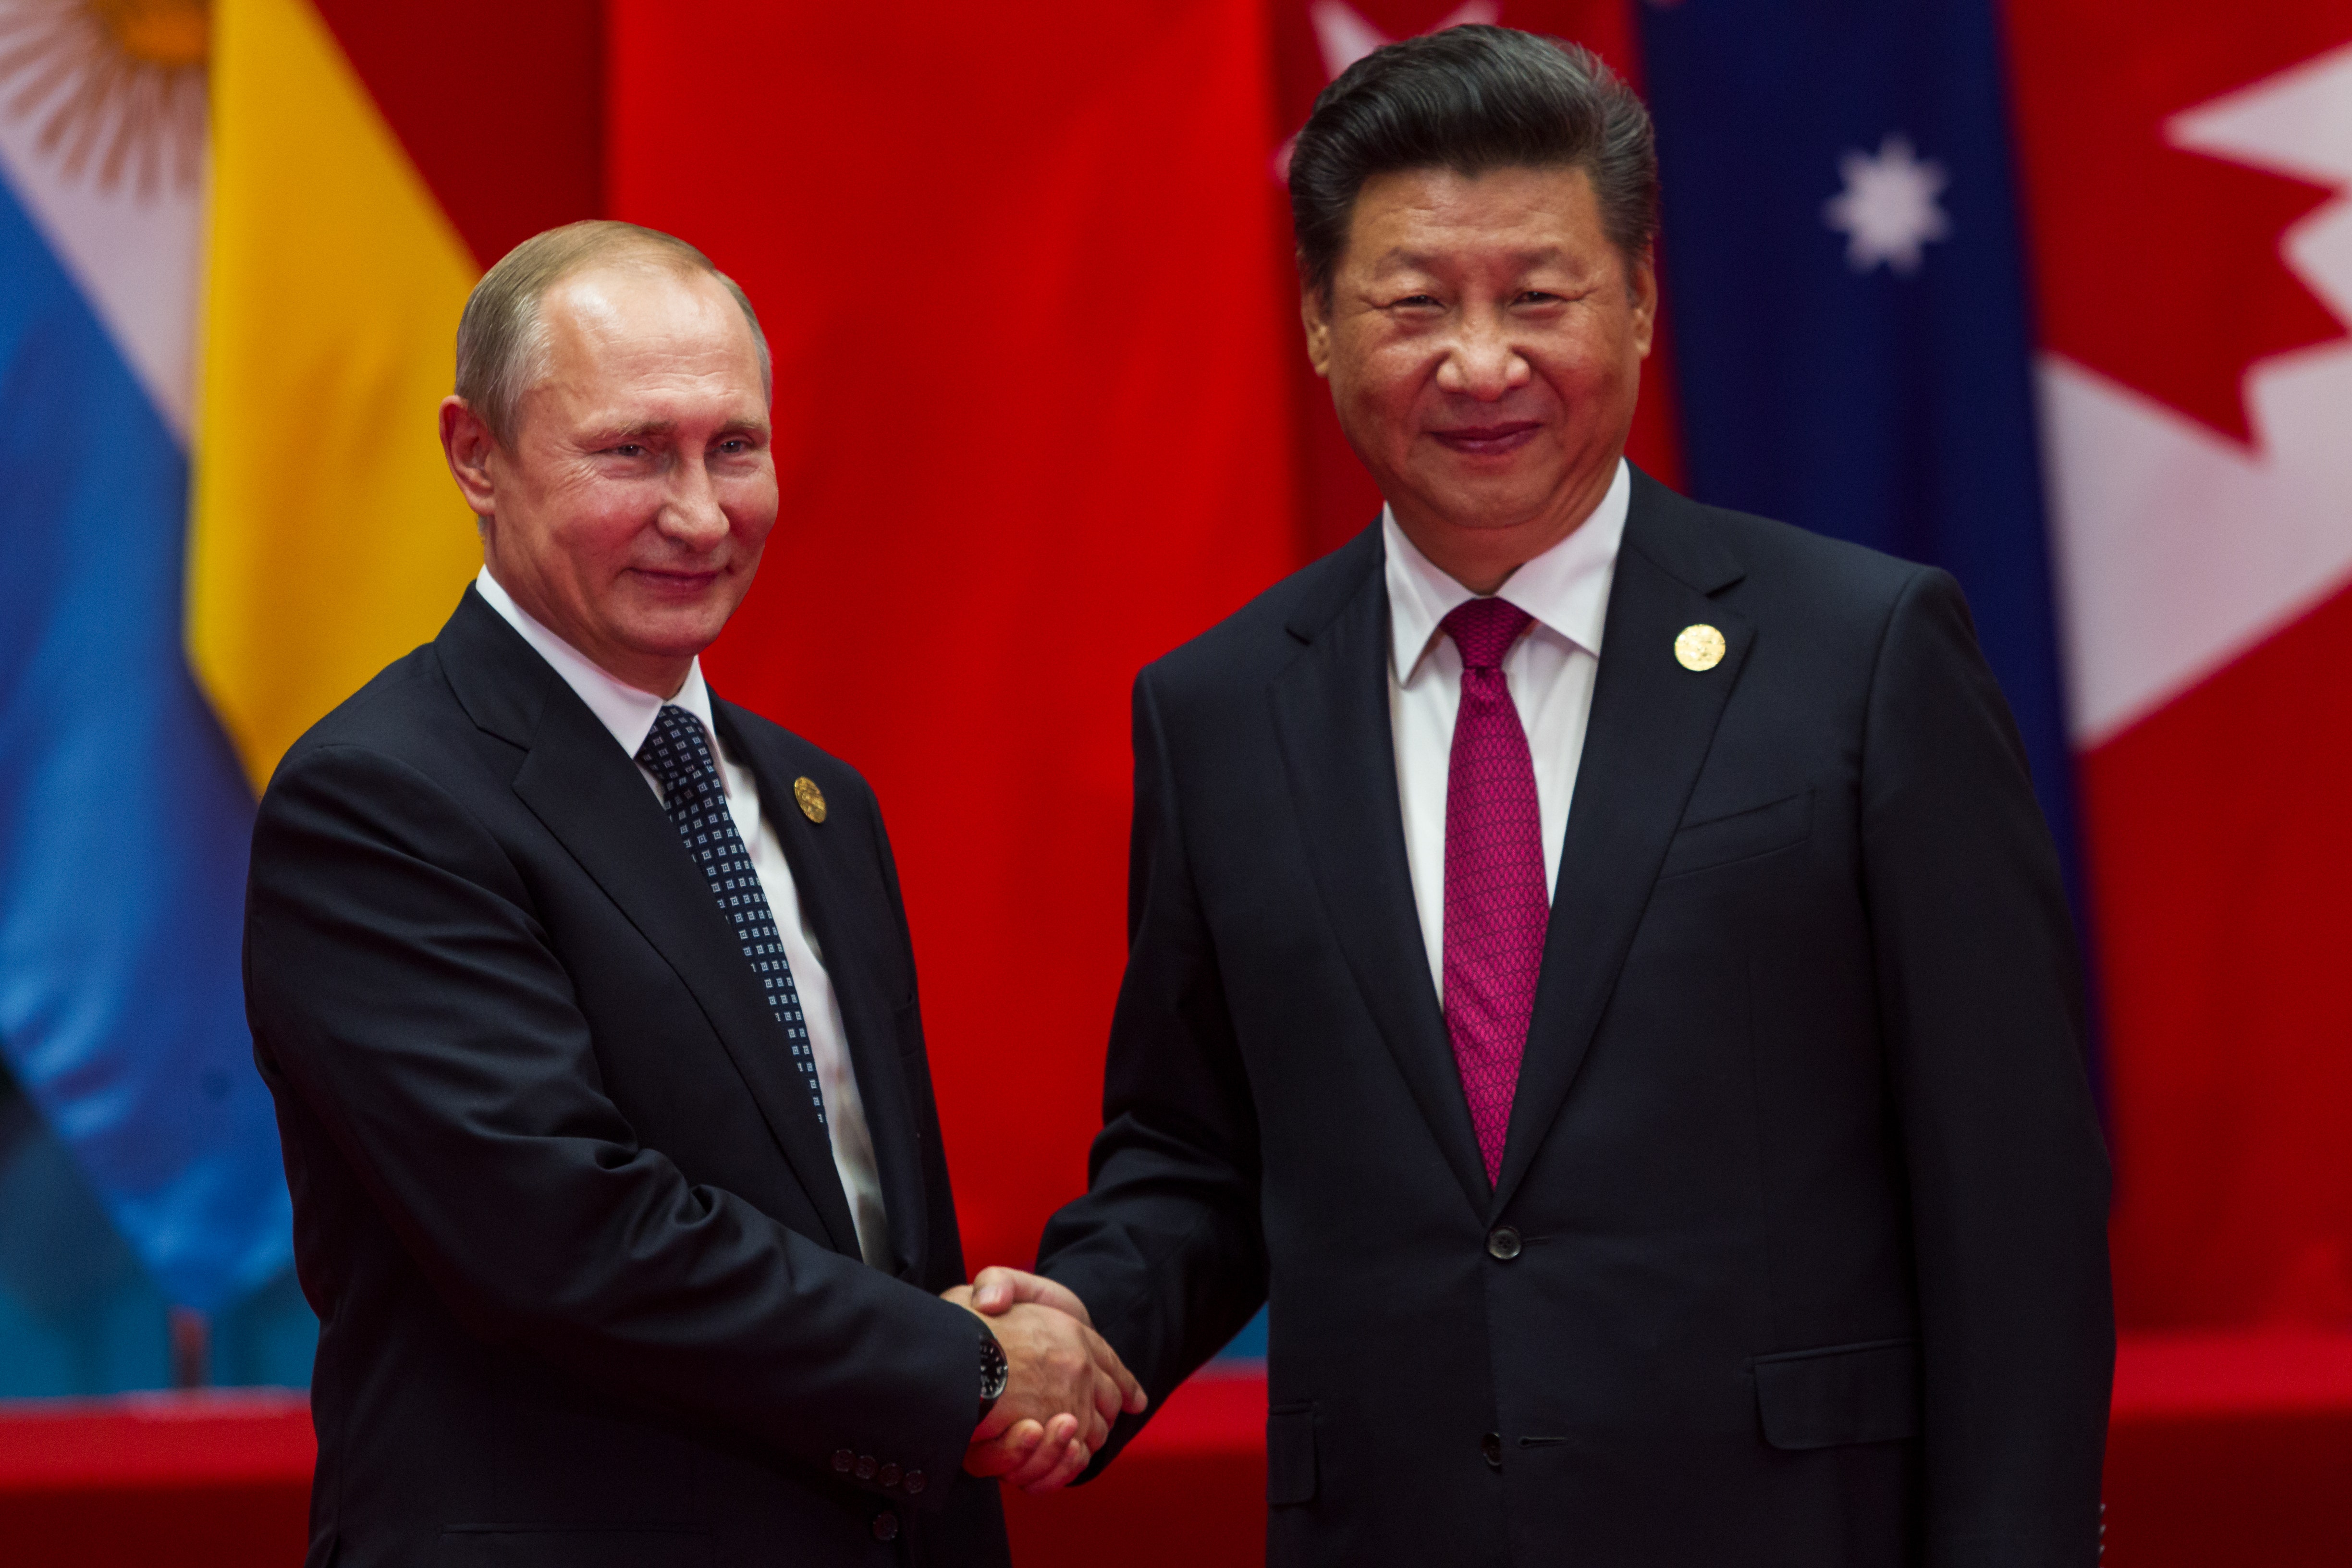 Xi Jinping To Meet Vladimir Putin In First Foreign Trip Since Onset Of COVID-19: Analysts On What To Expect With This Meeting